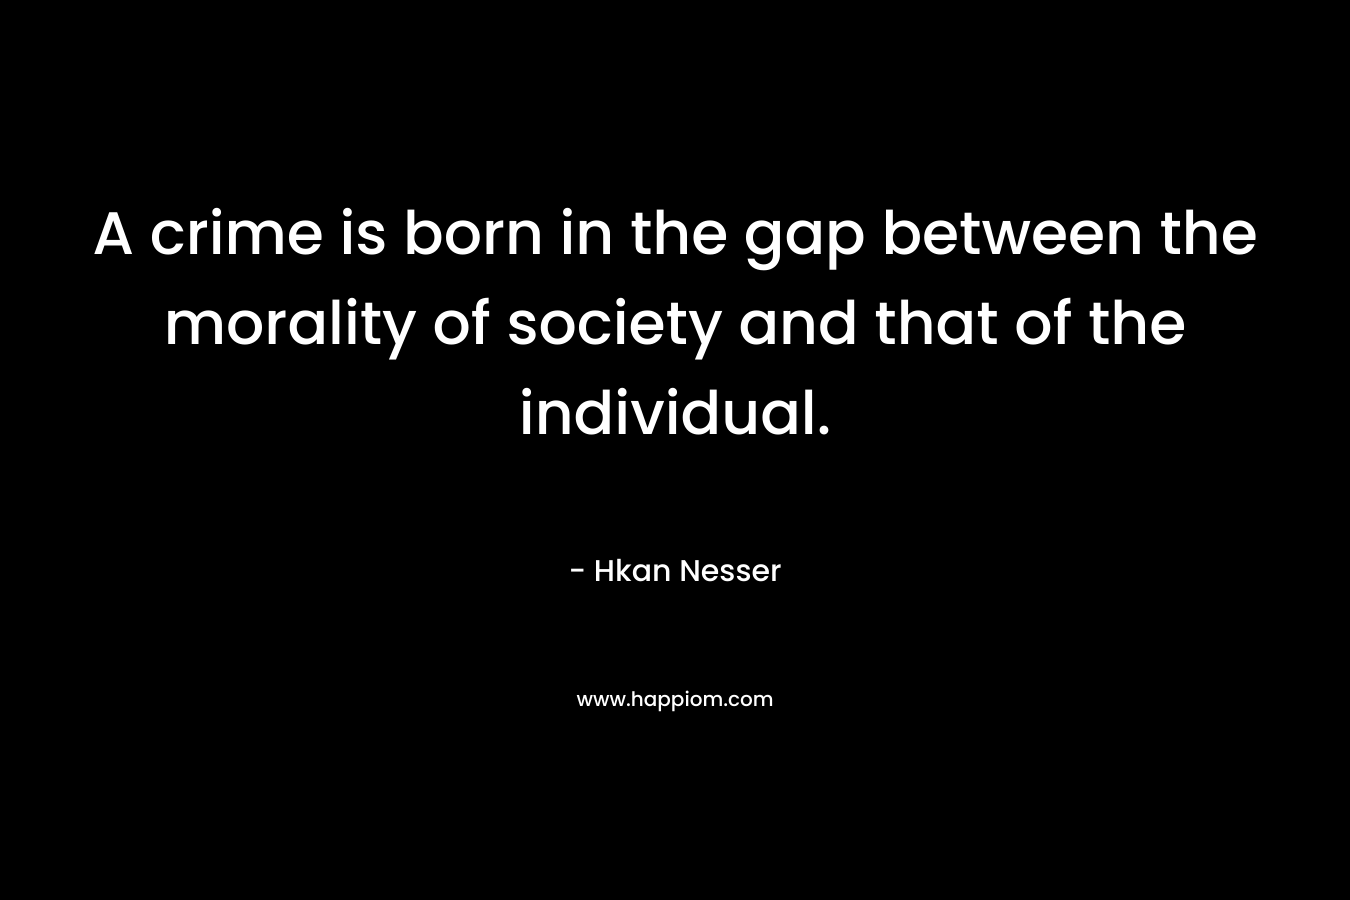 A crime is born in the gap between the morality of society and that of the individual. – Hkan Nesser